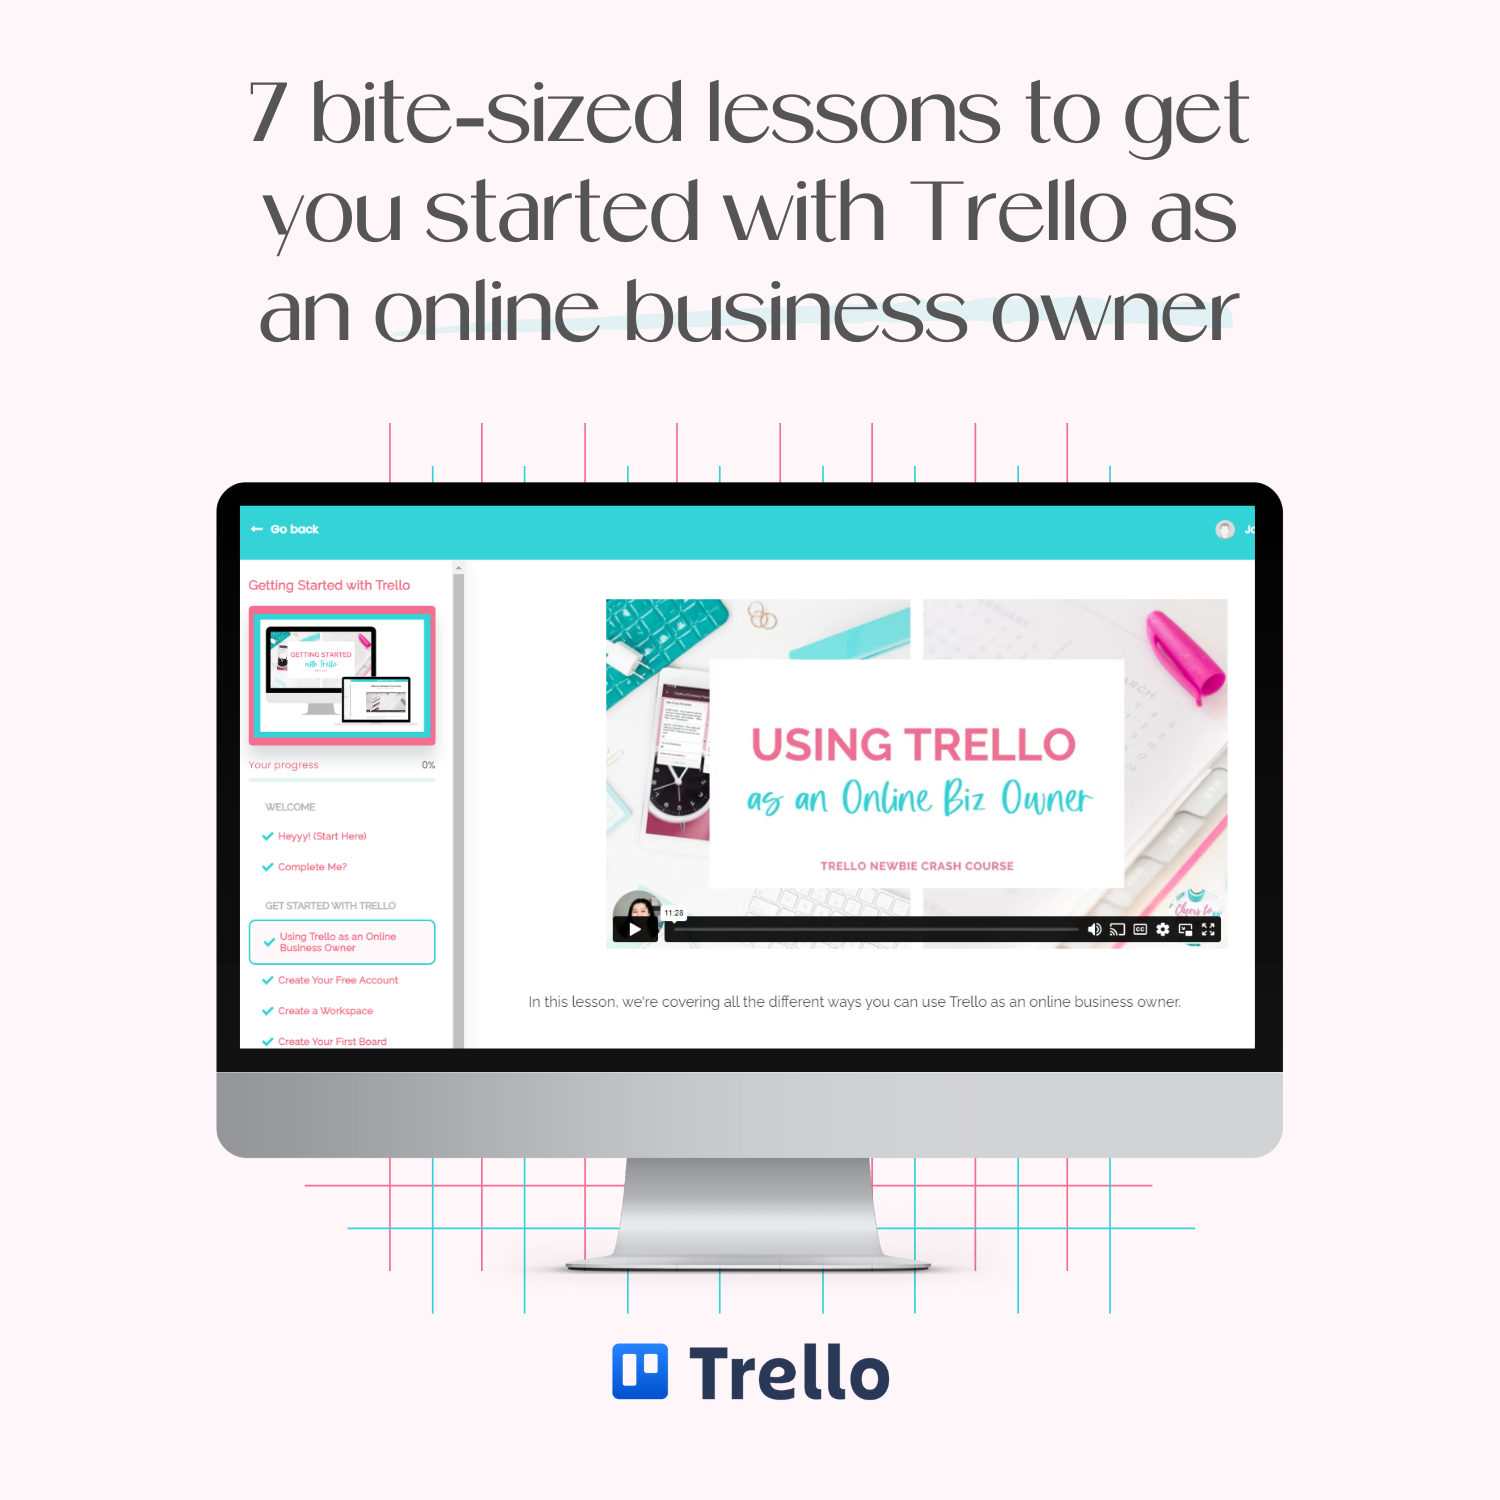 A monitor mockup displaying the course platform for Getting Started with Trello.